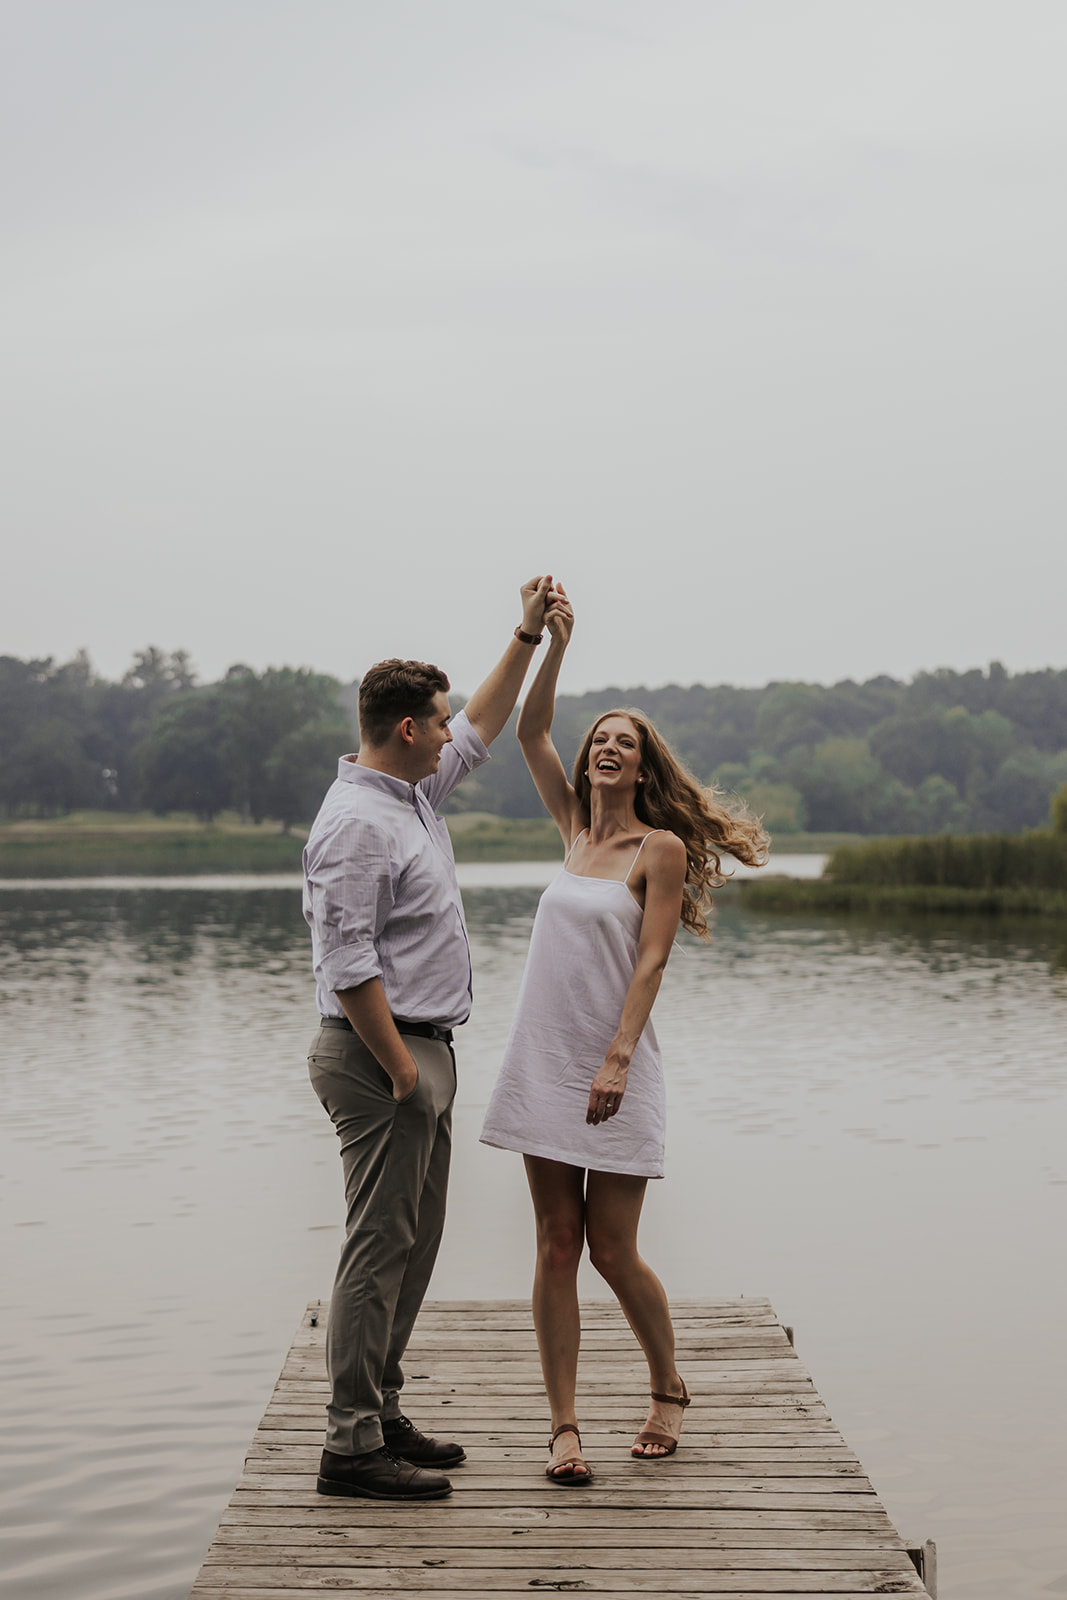 Beautiful couple dance together on a Lake Acworth dock during their engagement photoshoot. A simple and candid cute couple photo idea